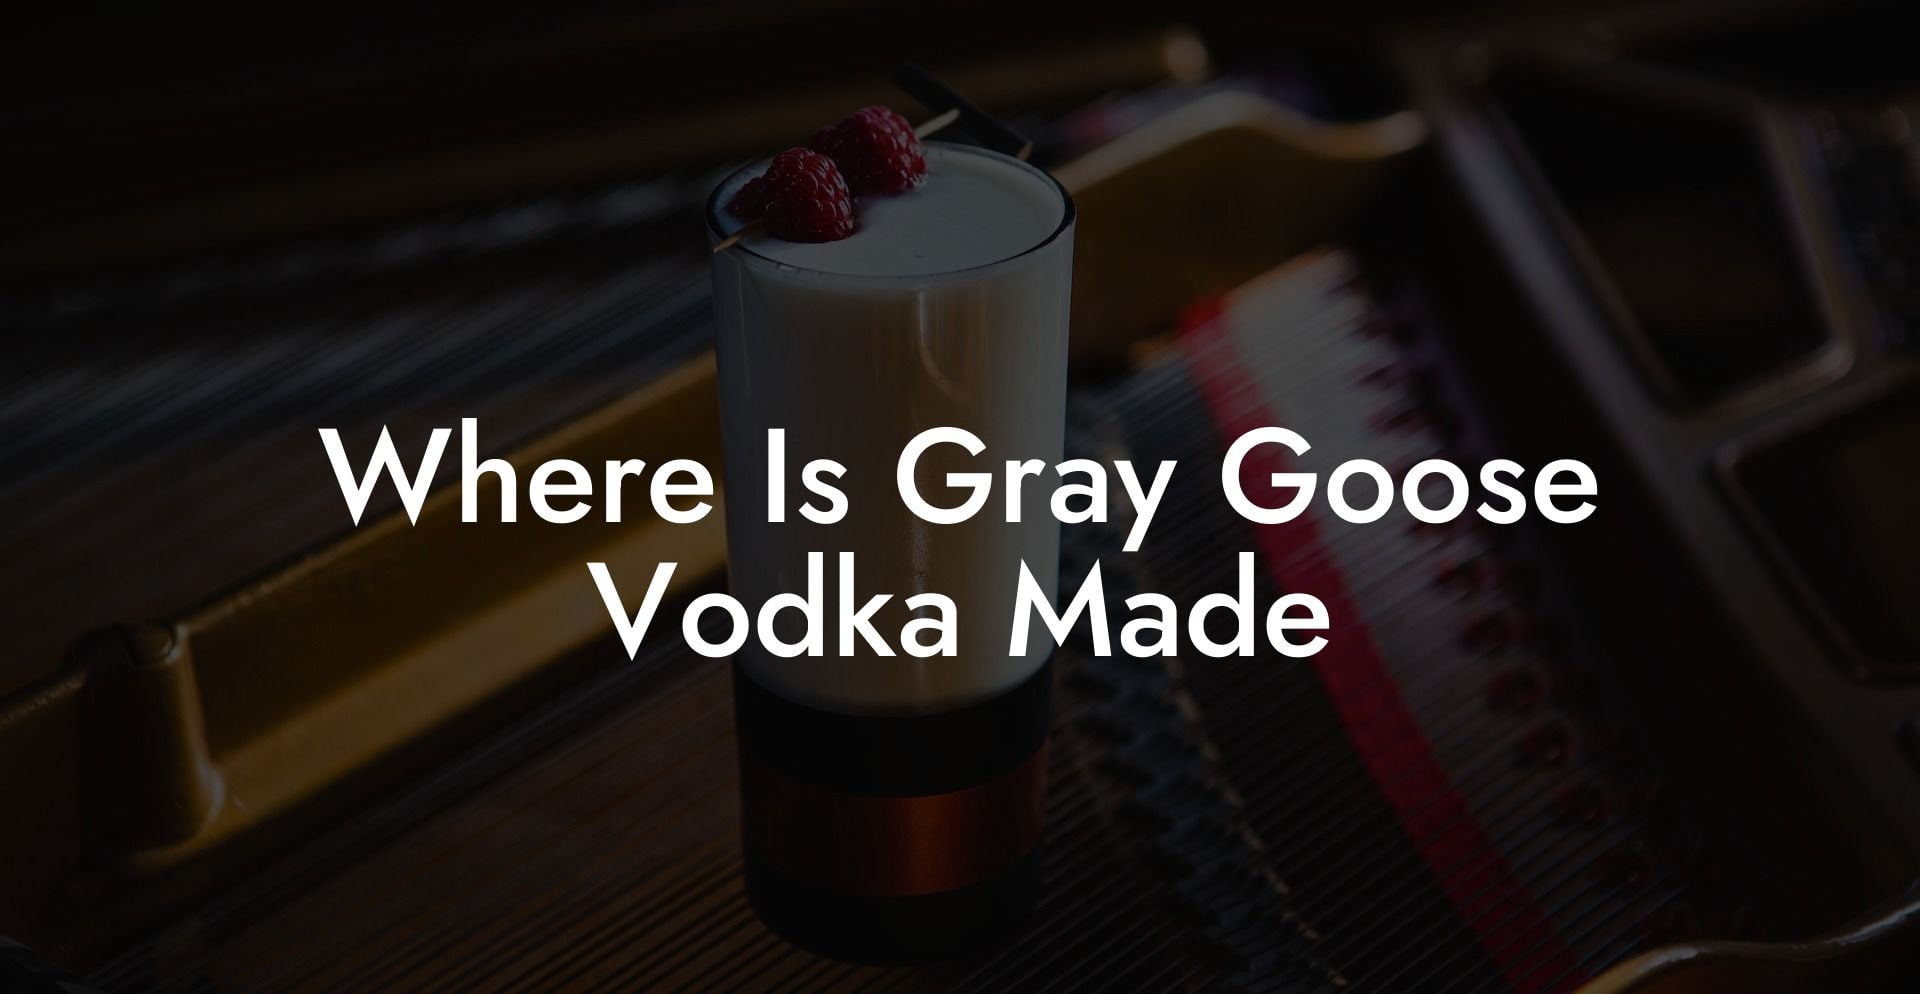 Where Is Gray Goose Vodka Made